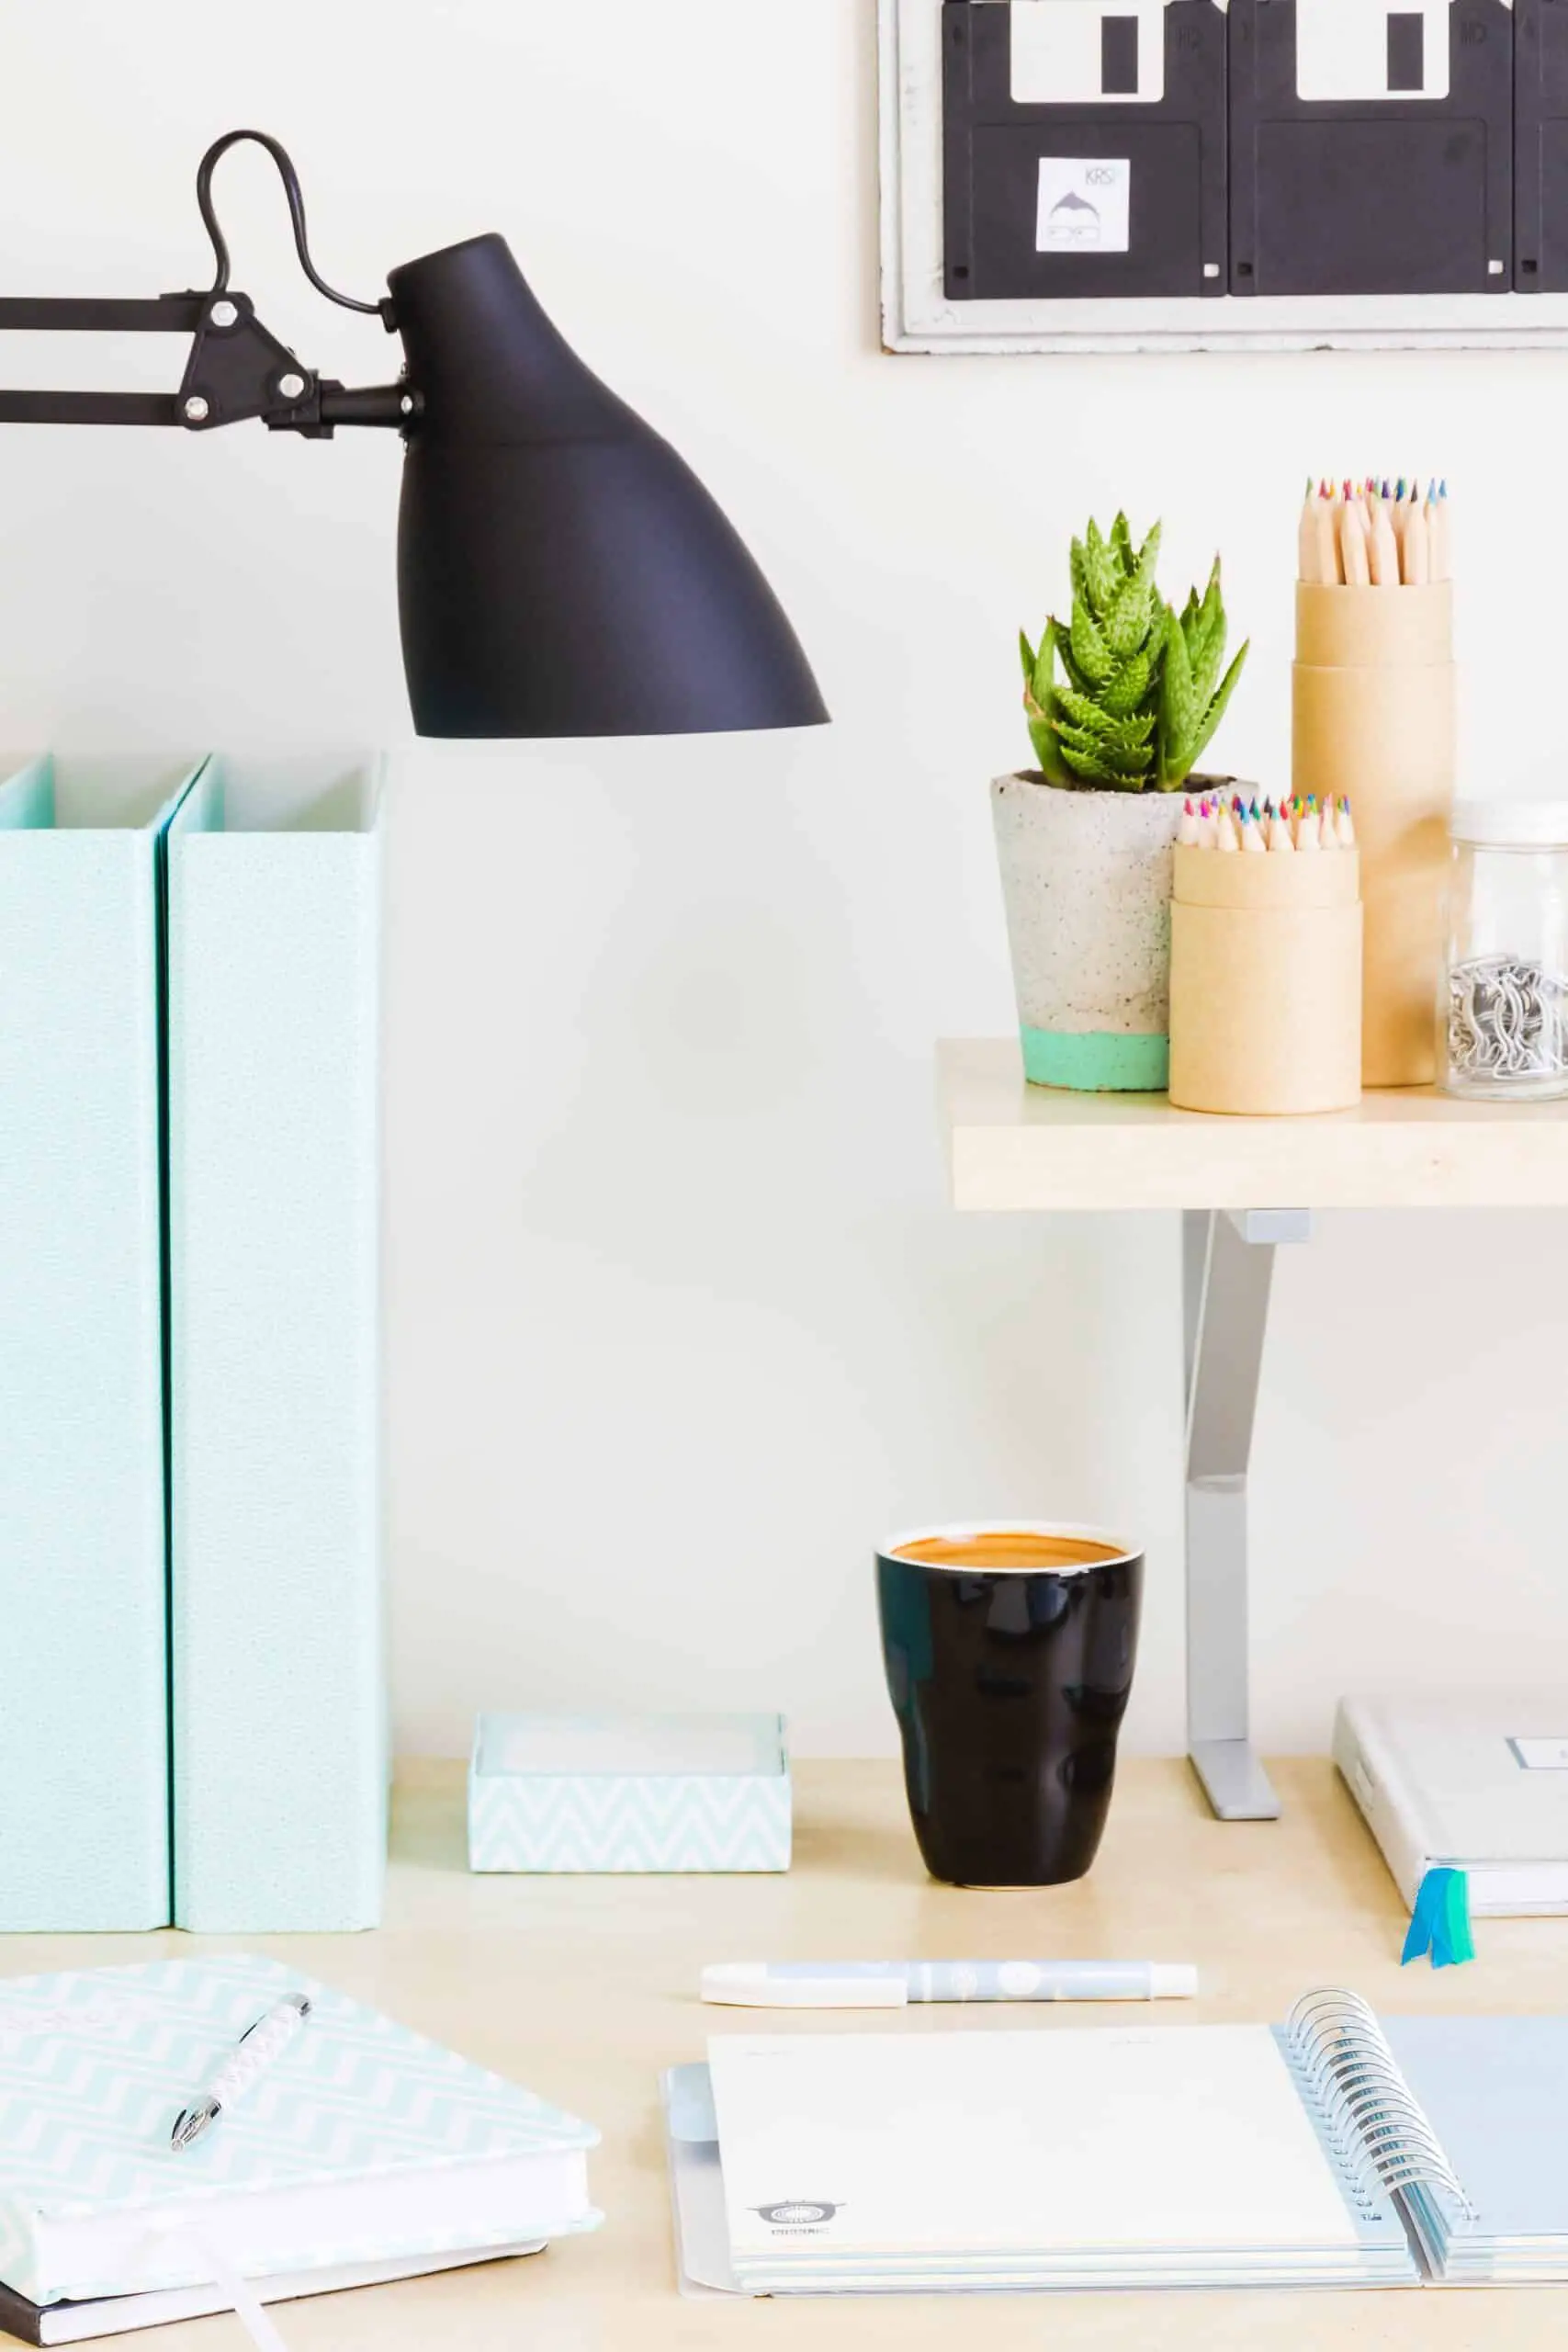 Top Things That Everyone Needs To Change About Their Workspace at Home